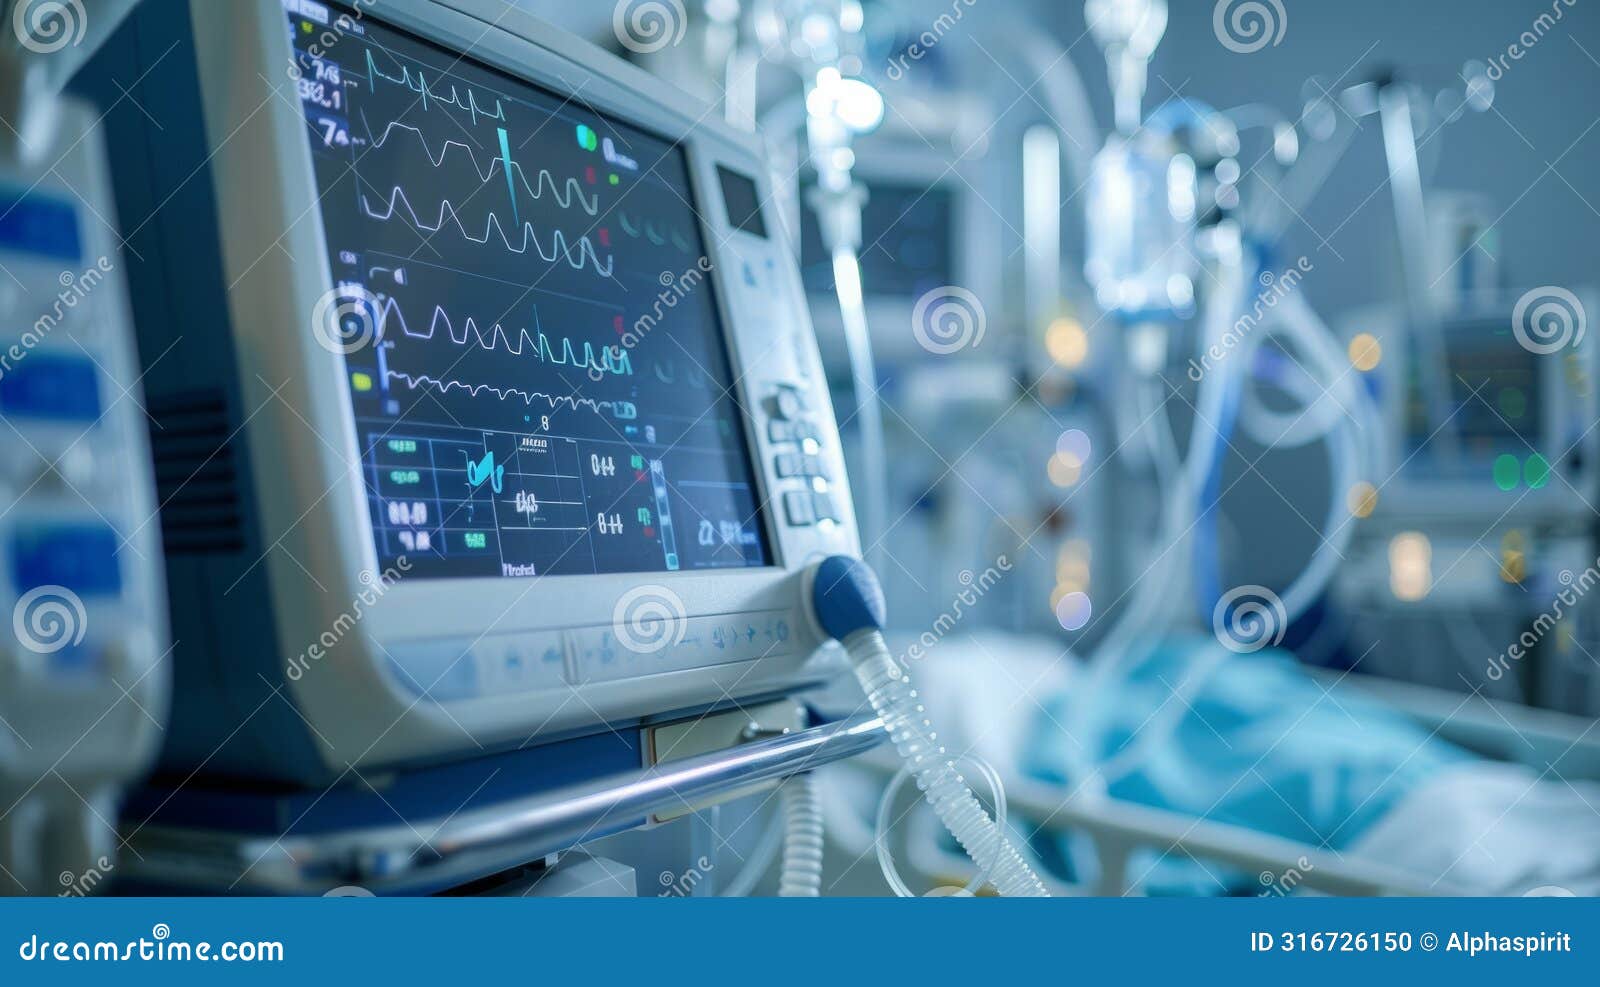 close-up of a vital signs monitor in an icu with medical equipment in the backdrop